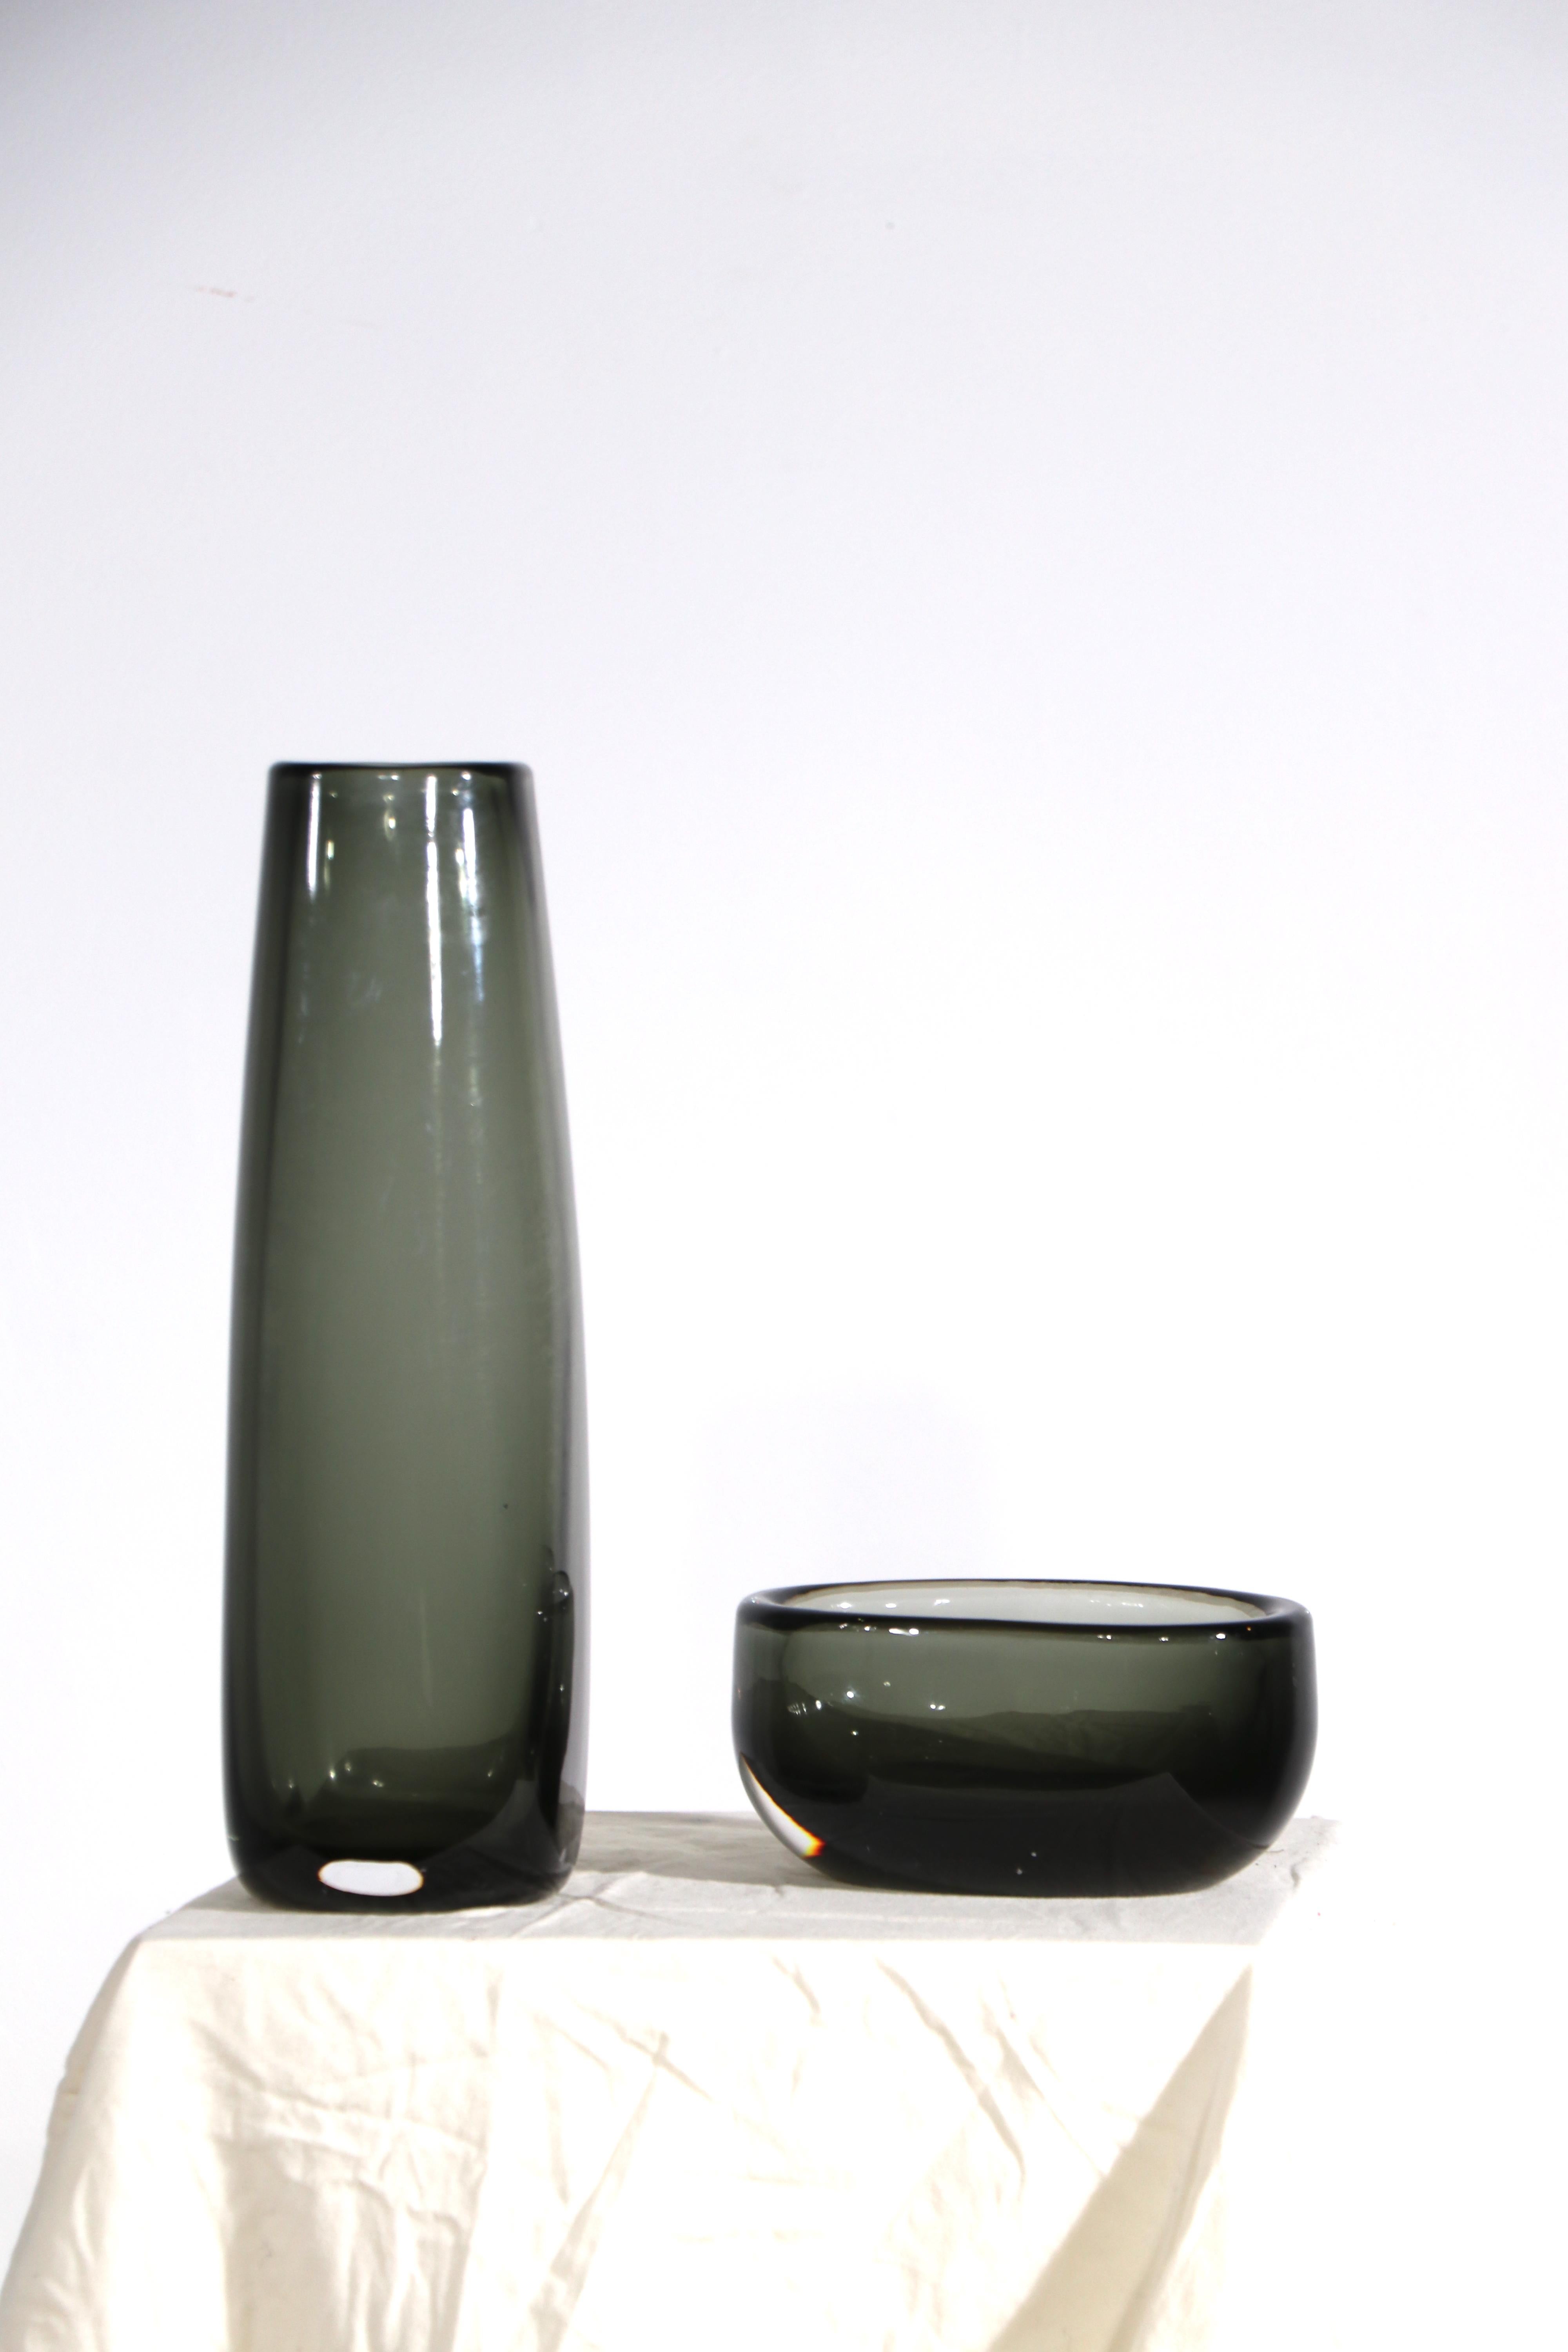 2 pc. Mid Century Art Glass vases by Nils Landberg for Orrefors. Both are in excellent condition free of damage , both are fully and correctly marked. Offered and priced as a lot of two. 
 Smaller piece:
5.75 W x 3.5 D x 2.75 H
 Taller Vase:
3 W